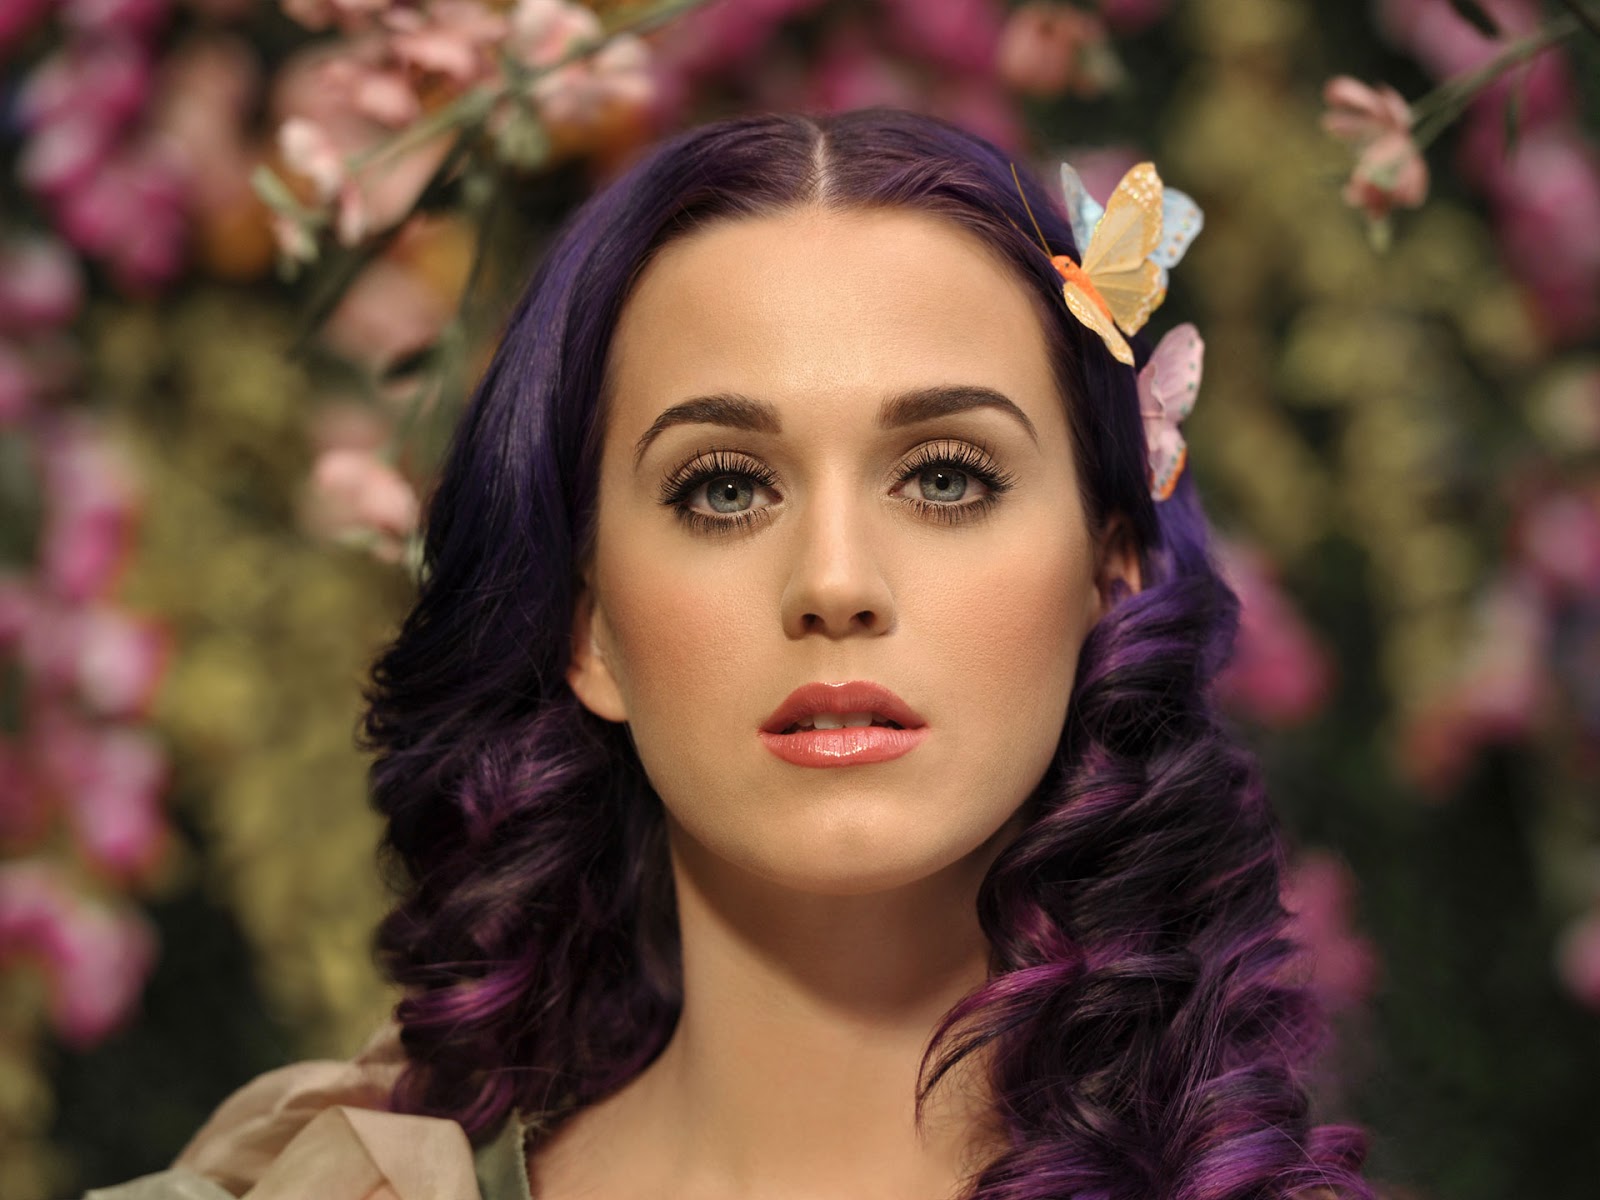 General photo of Katy Perry